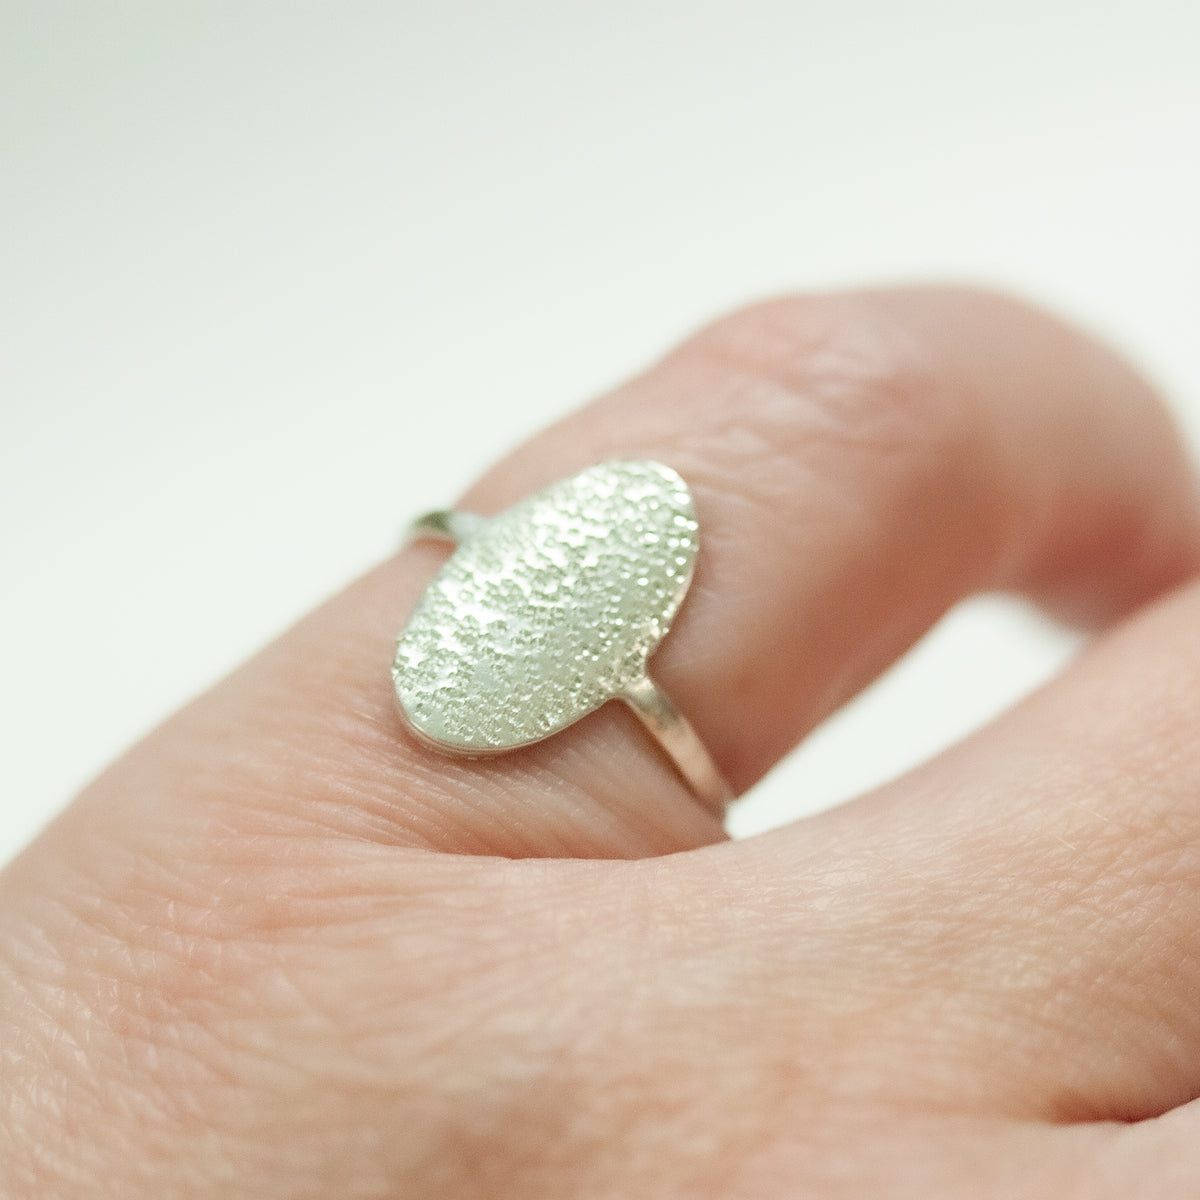 DIAMOND DUSTED EMBRACED ADJUSTABLE RING